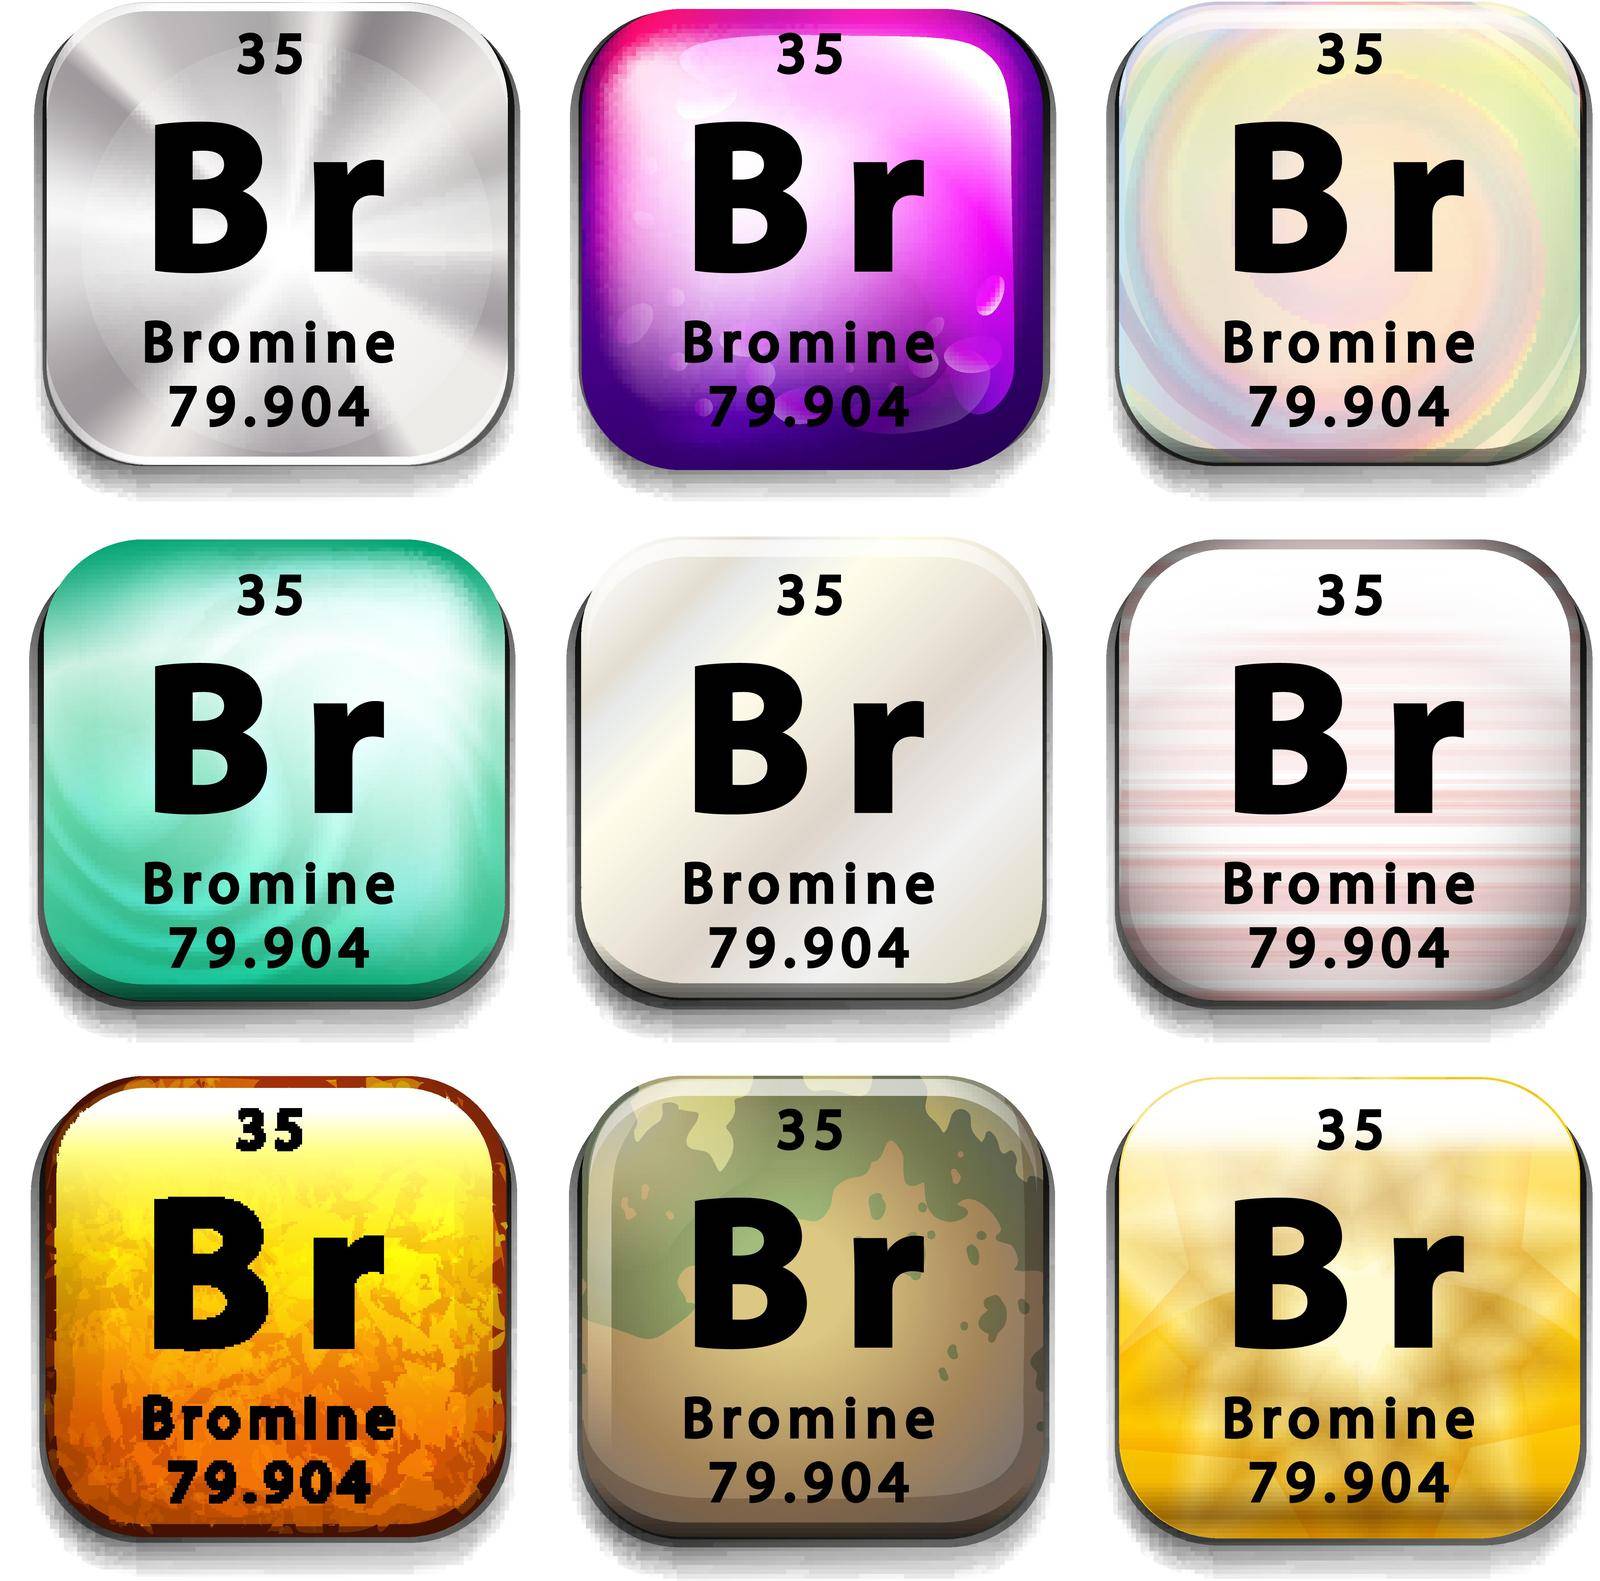 The Bromine element by iimages